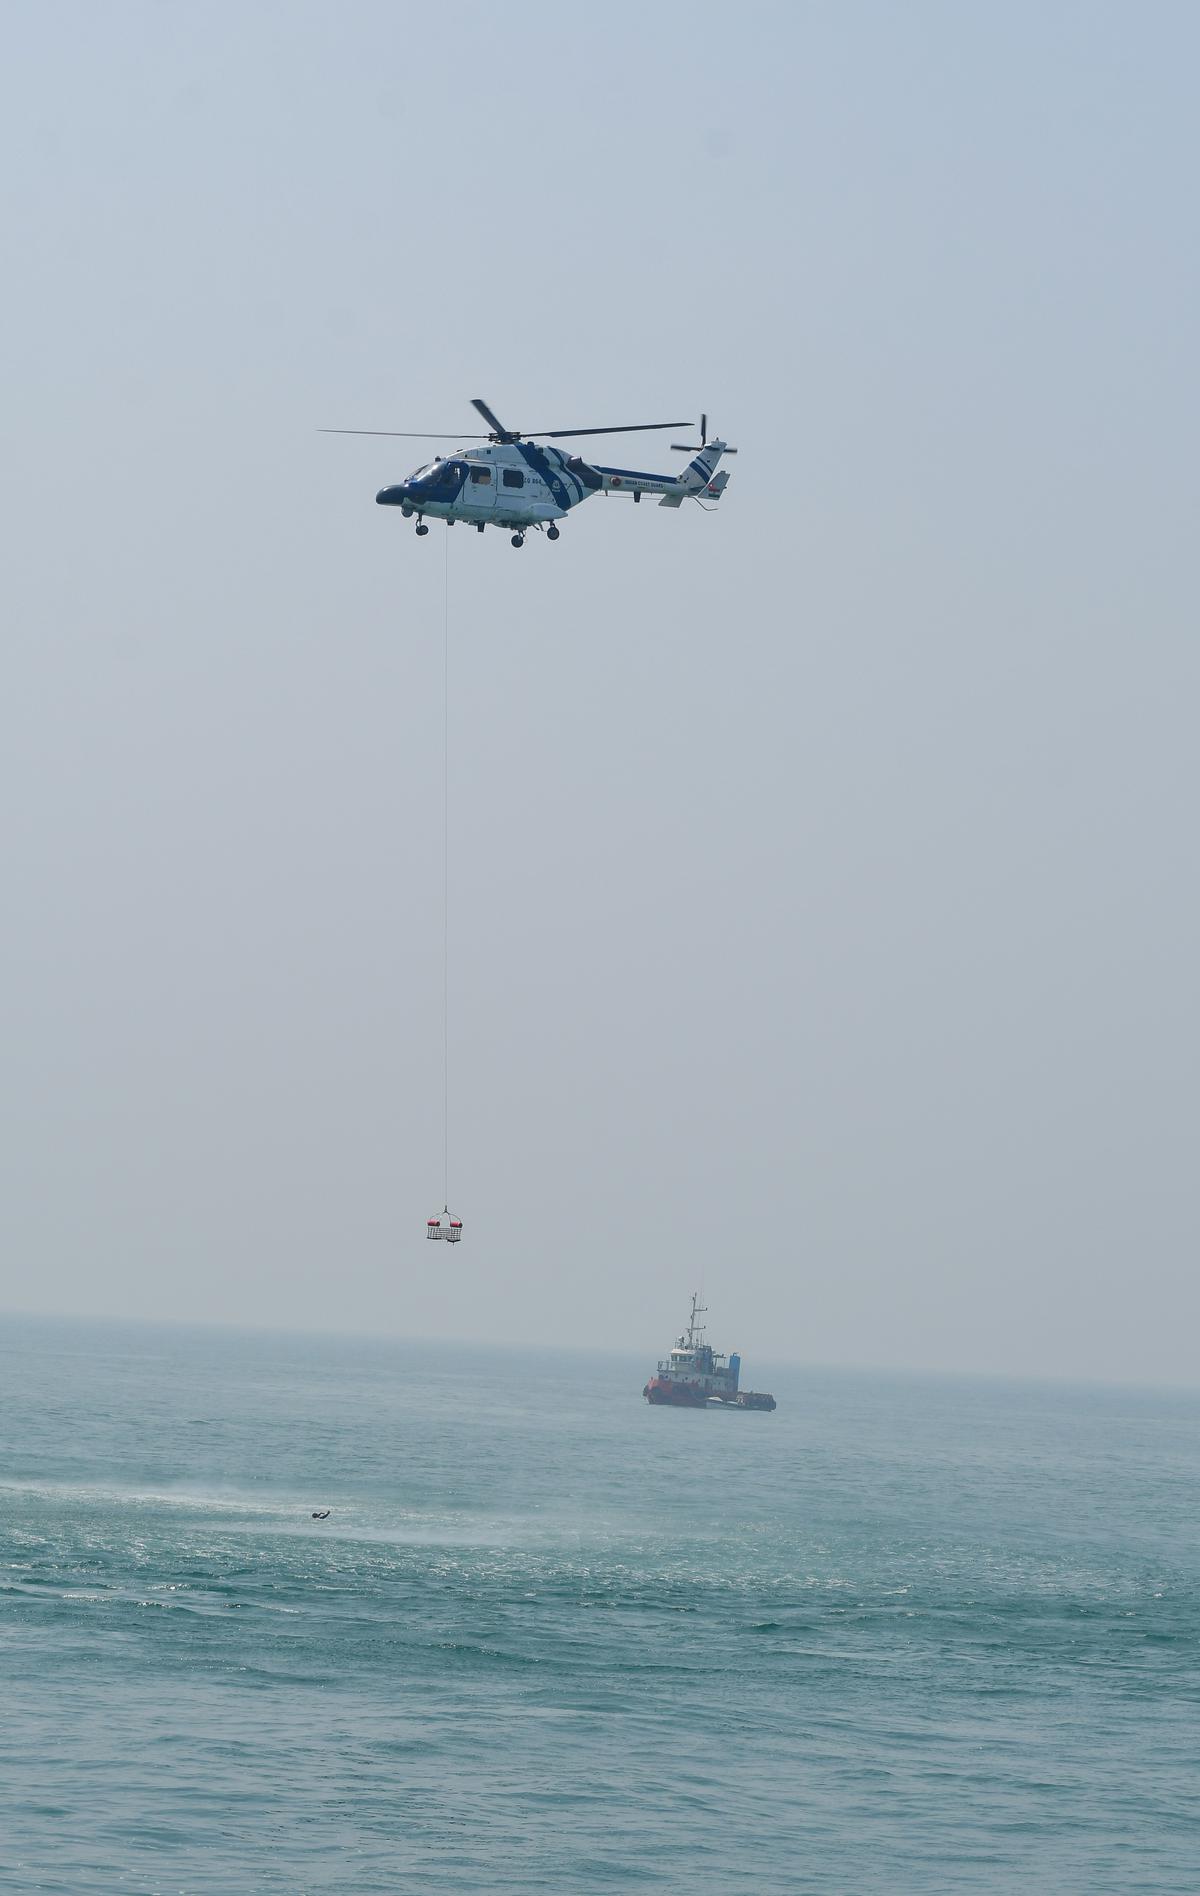 Operational demonstration units of the Indian Coast Guard were taking place at sea on the occasion of the 47th Coast Guard Meeting Day at Mangaluru on February 2, 2023.